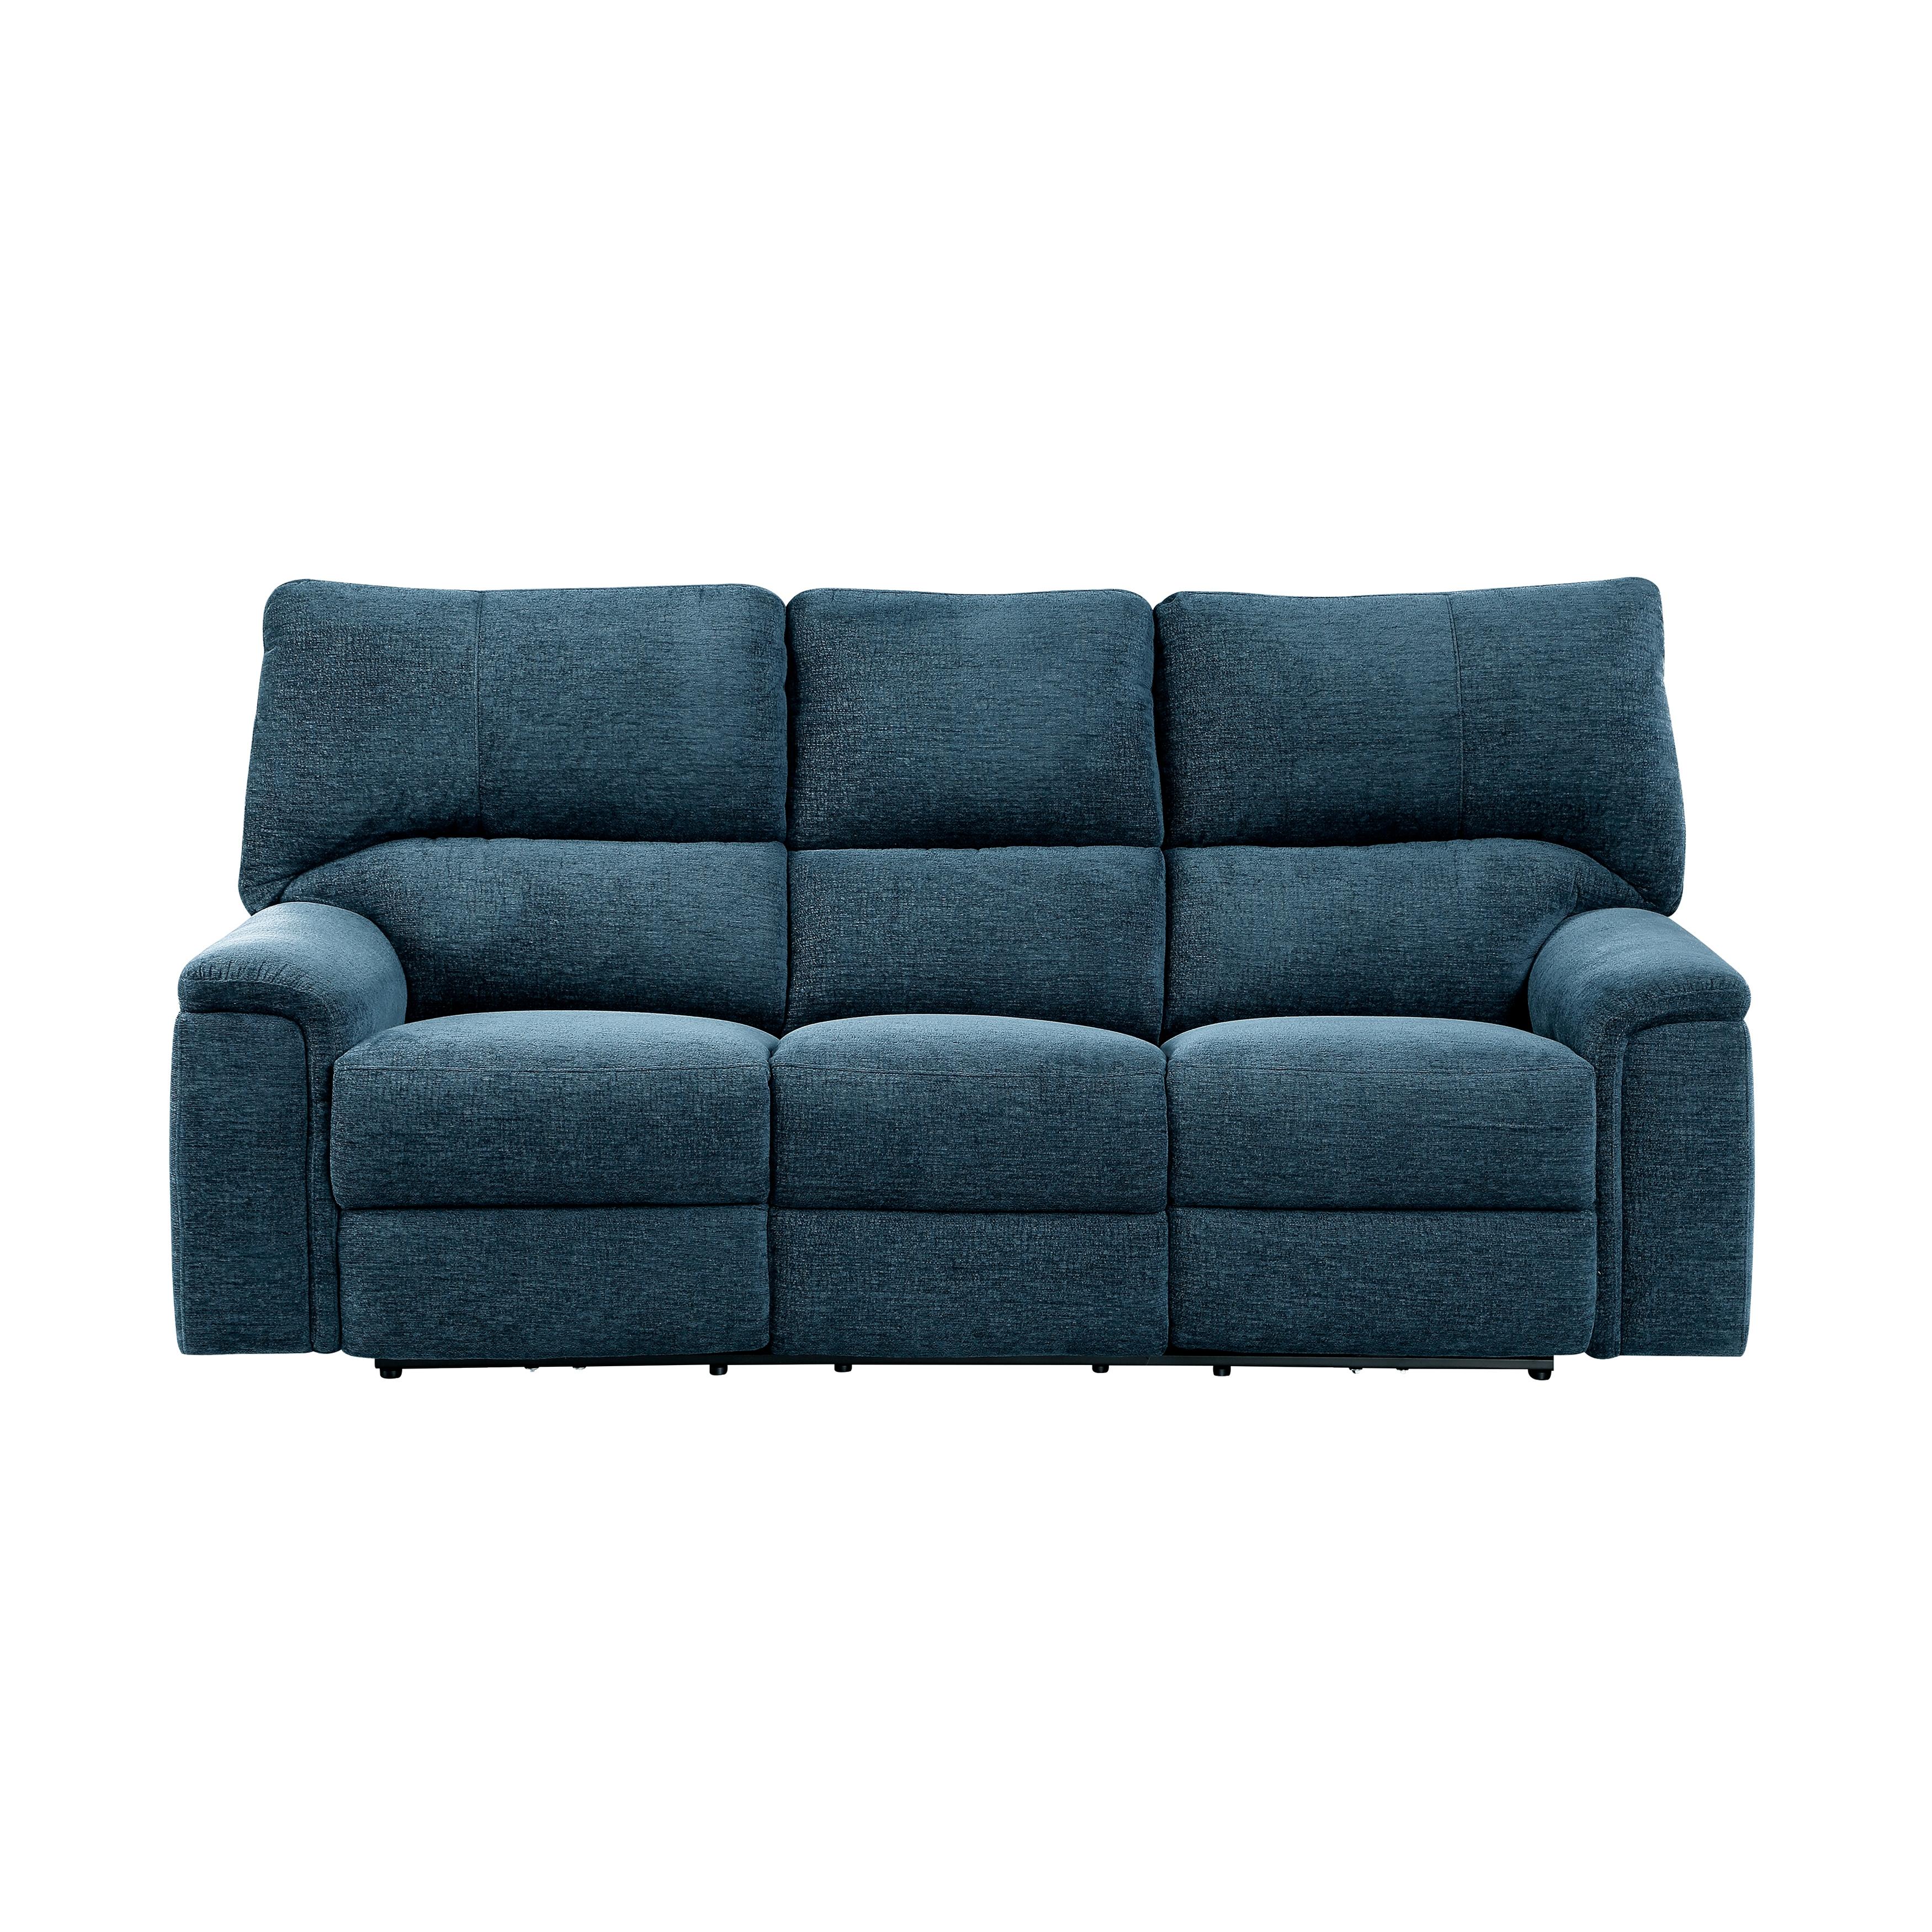 Transitional Power Reclining Sofa 9413IN-3PWH Dickinson 9413IN-3PWH in Indigo Chenille